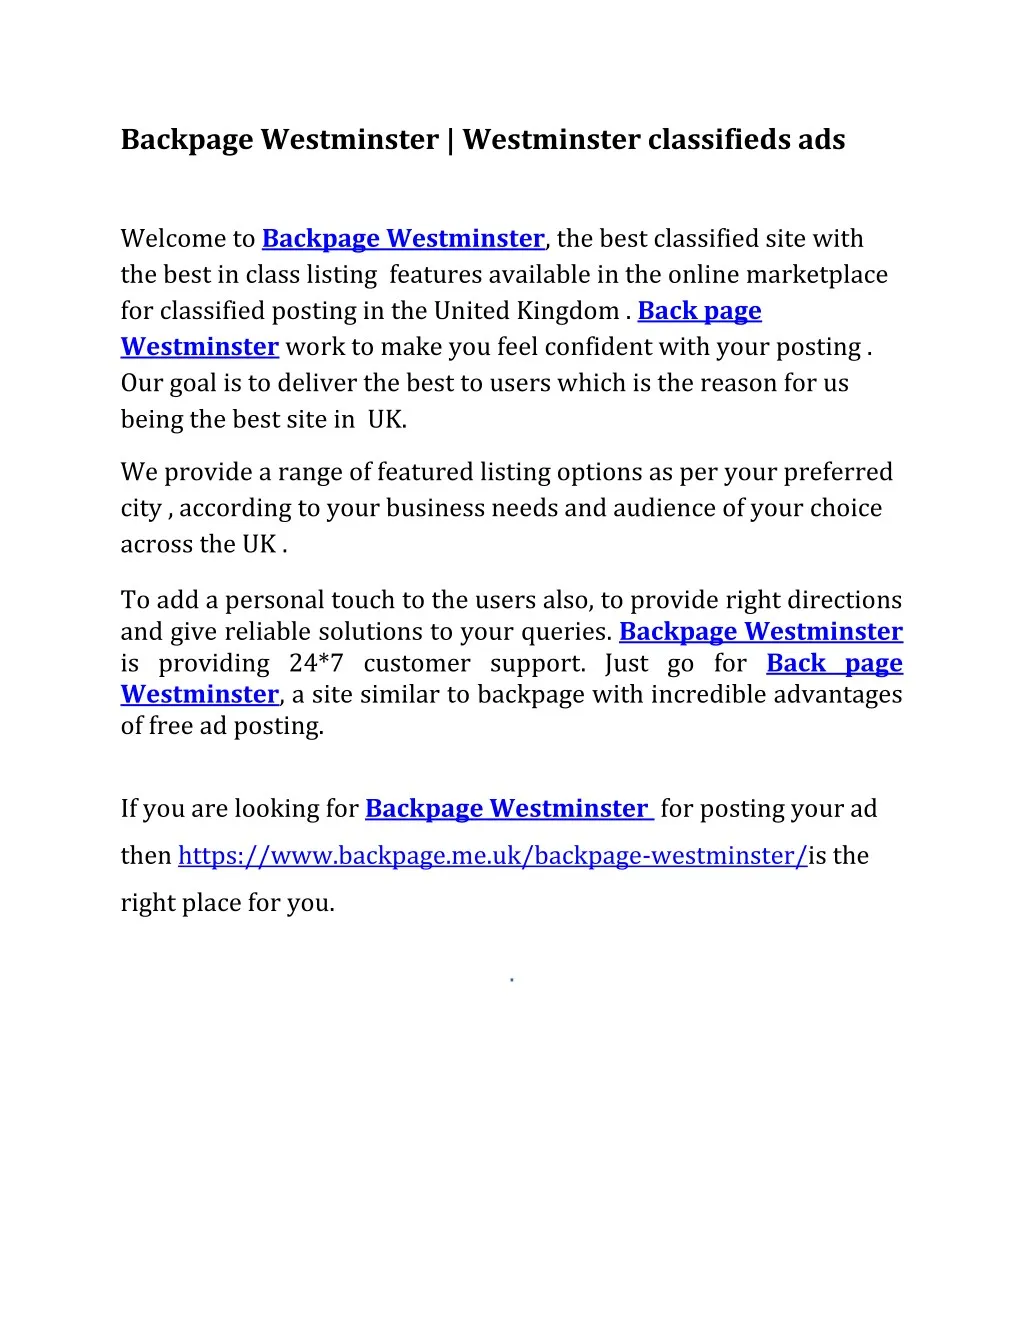 backpage westminster westminster classifieds ads